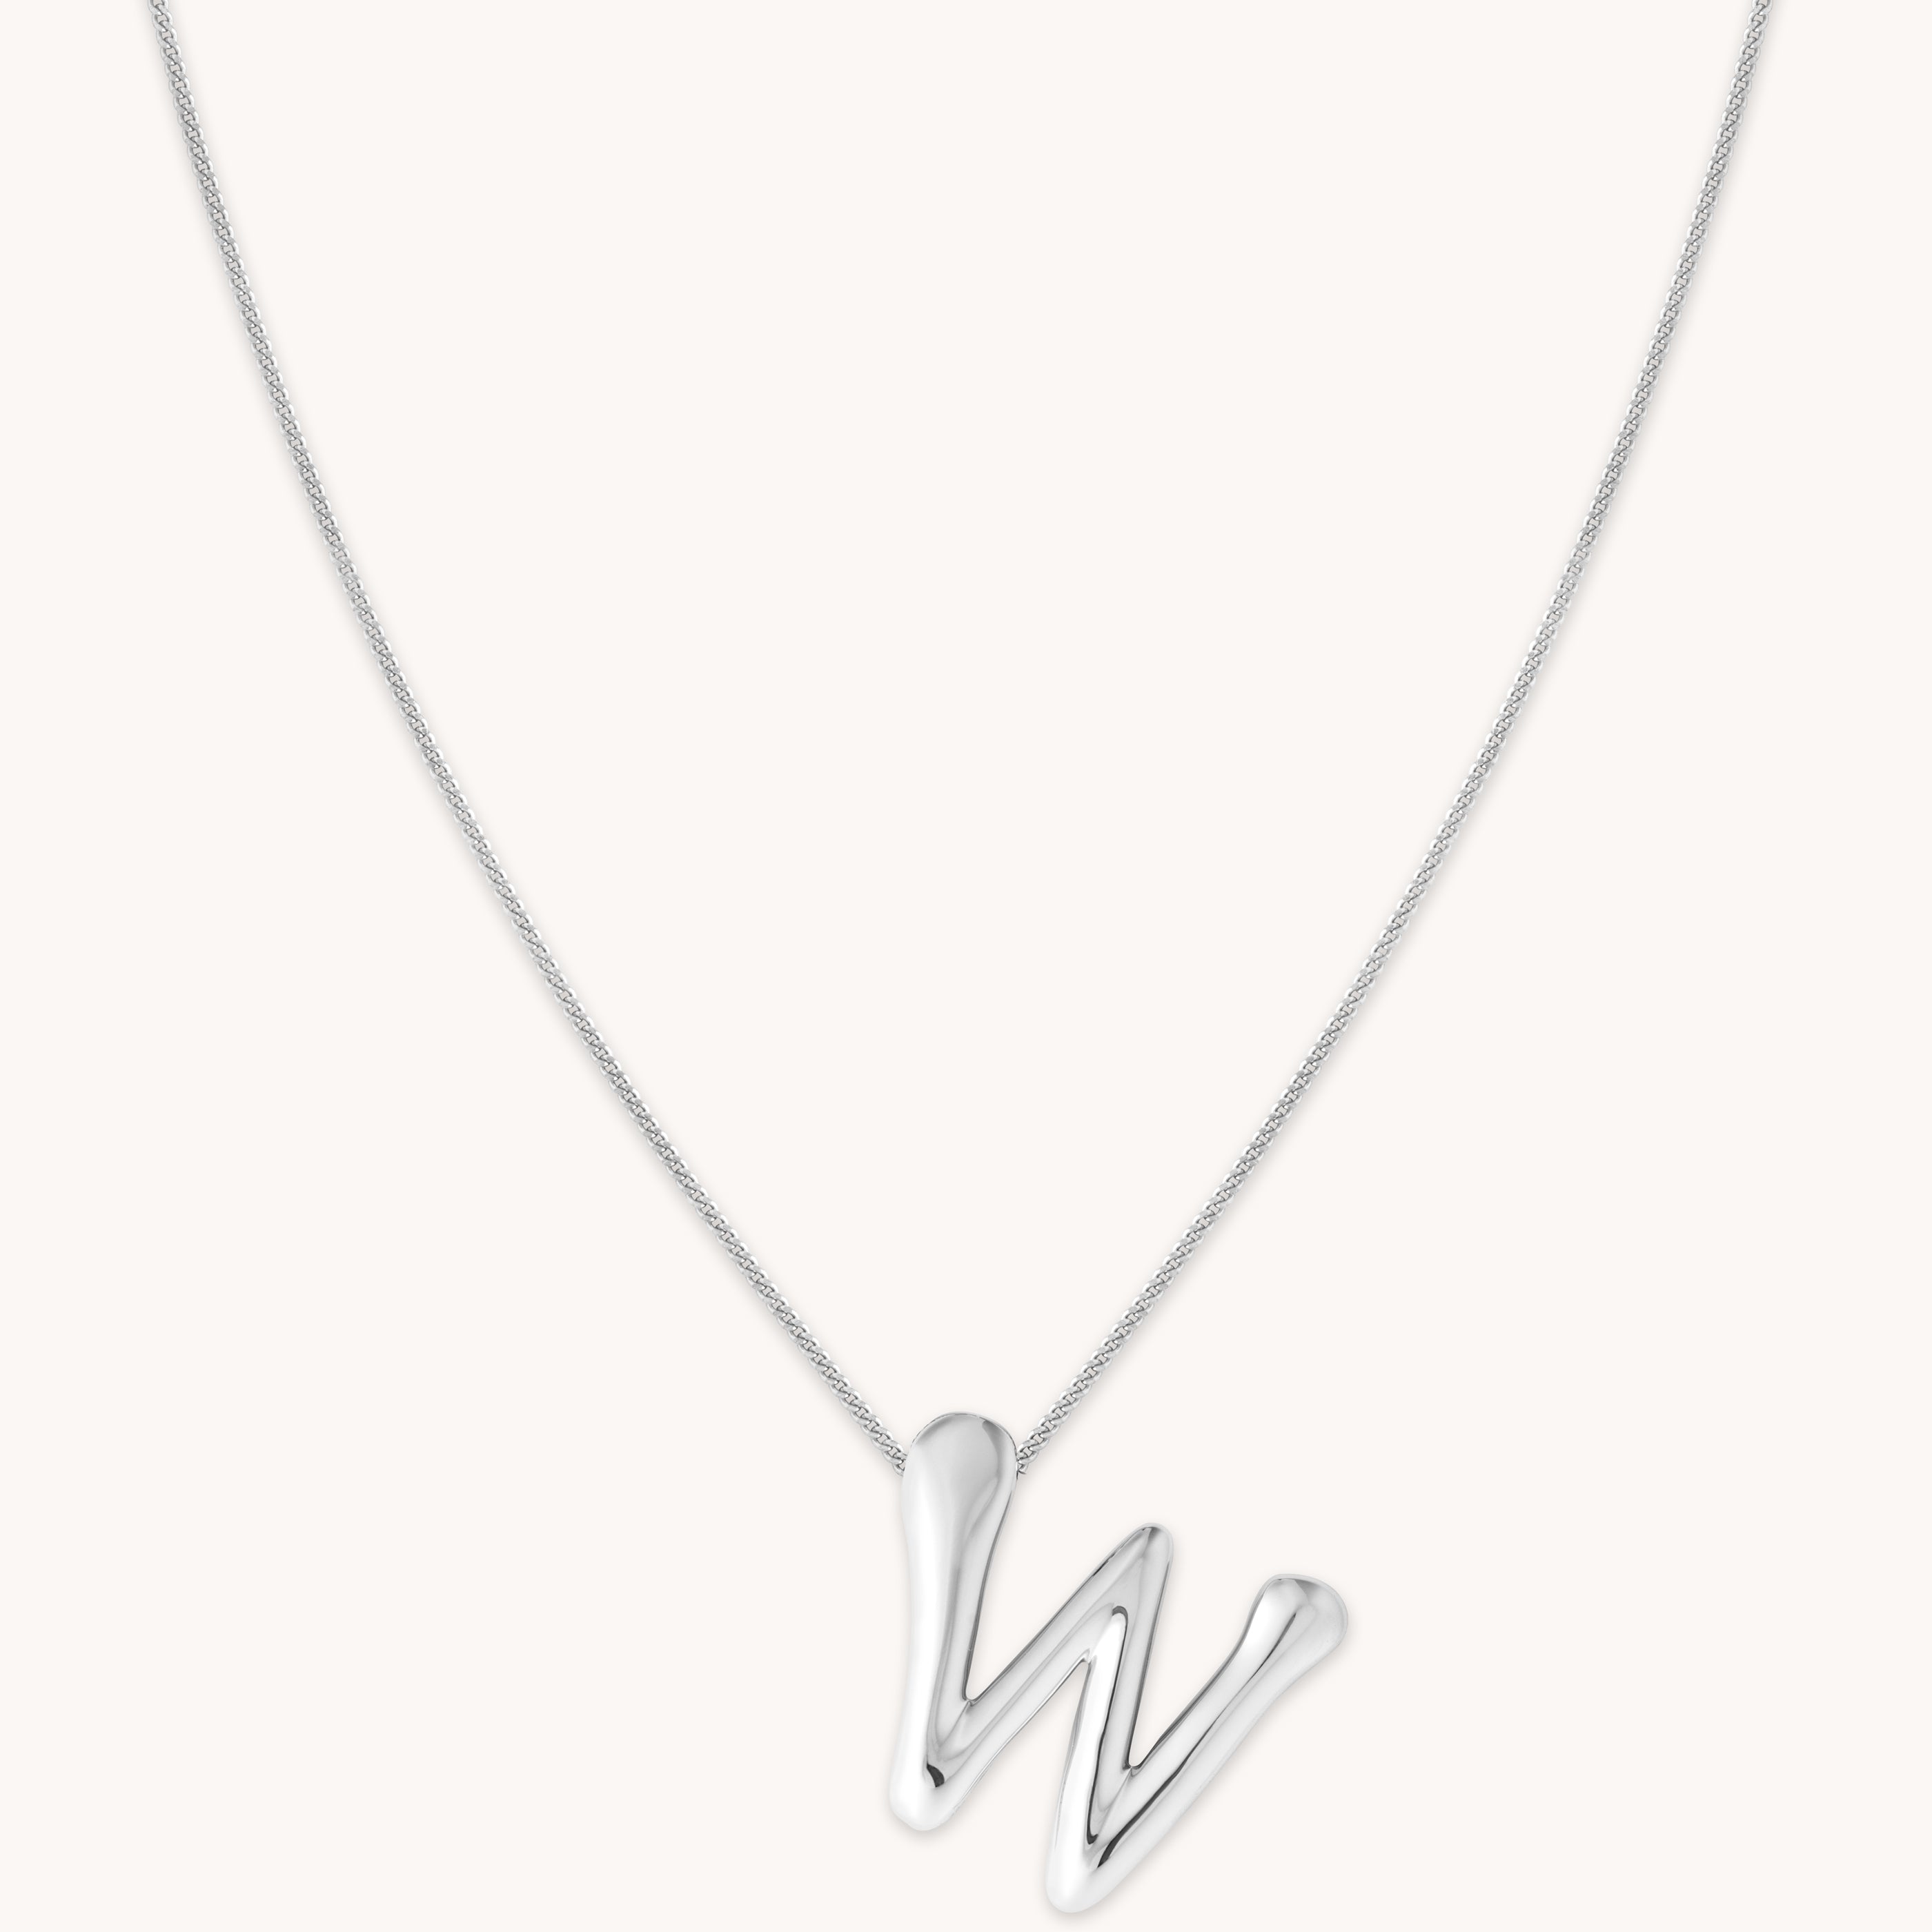 W Initial Bold Pendant Necklace in Silver